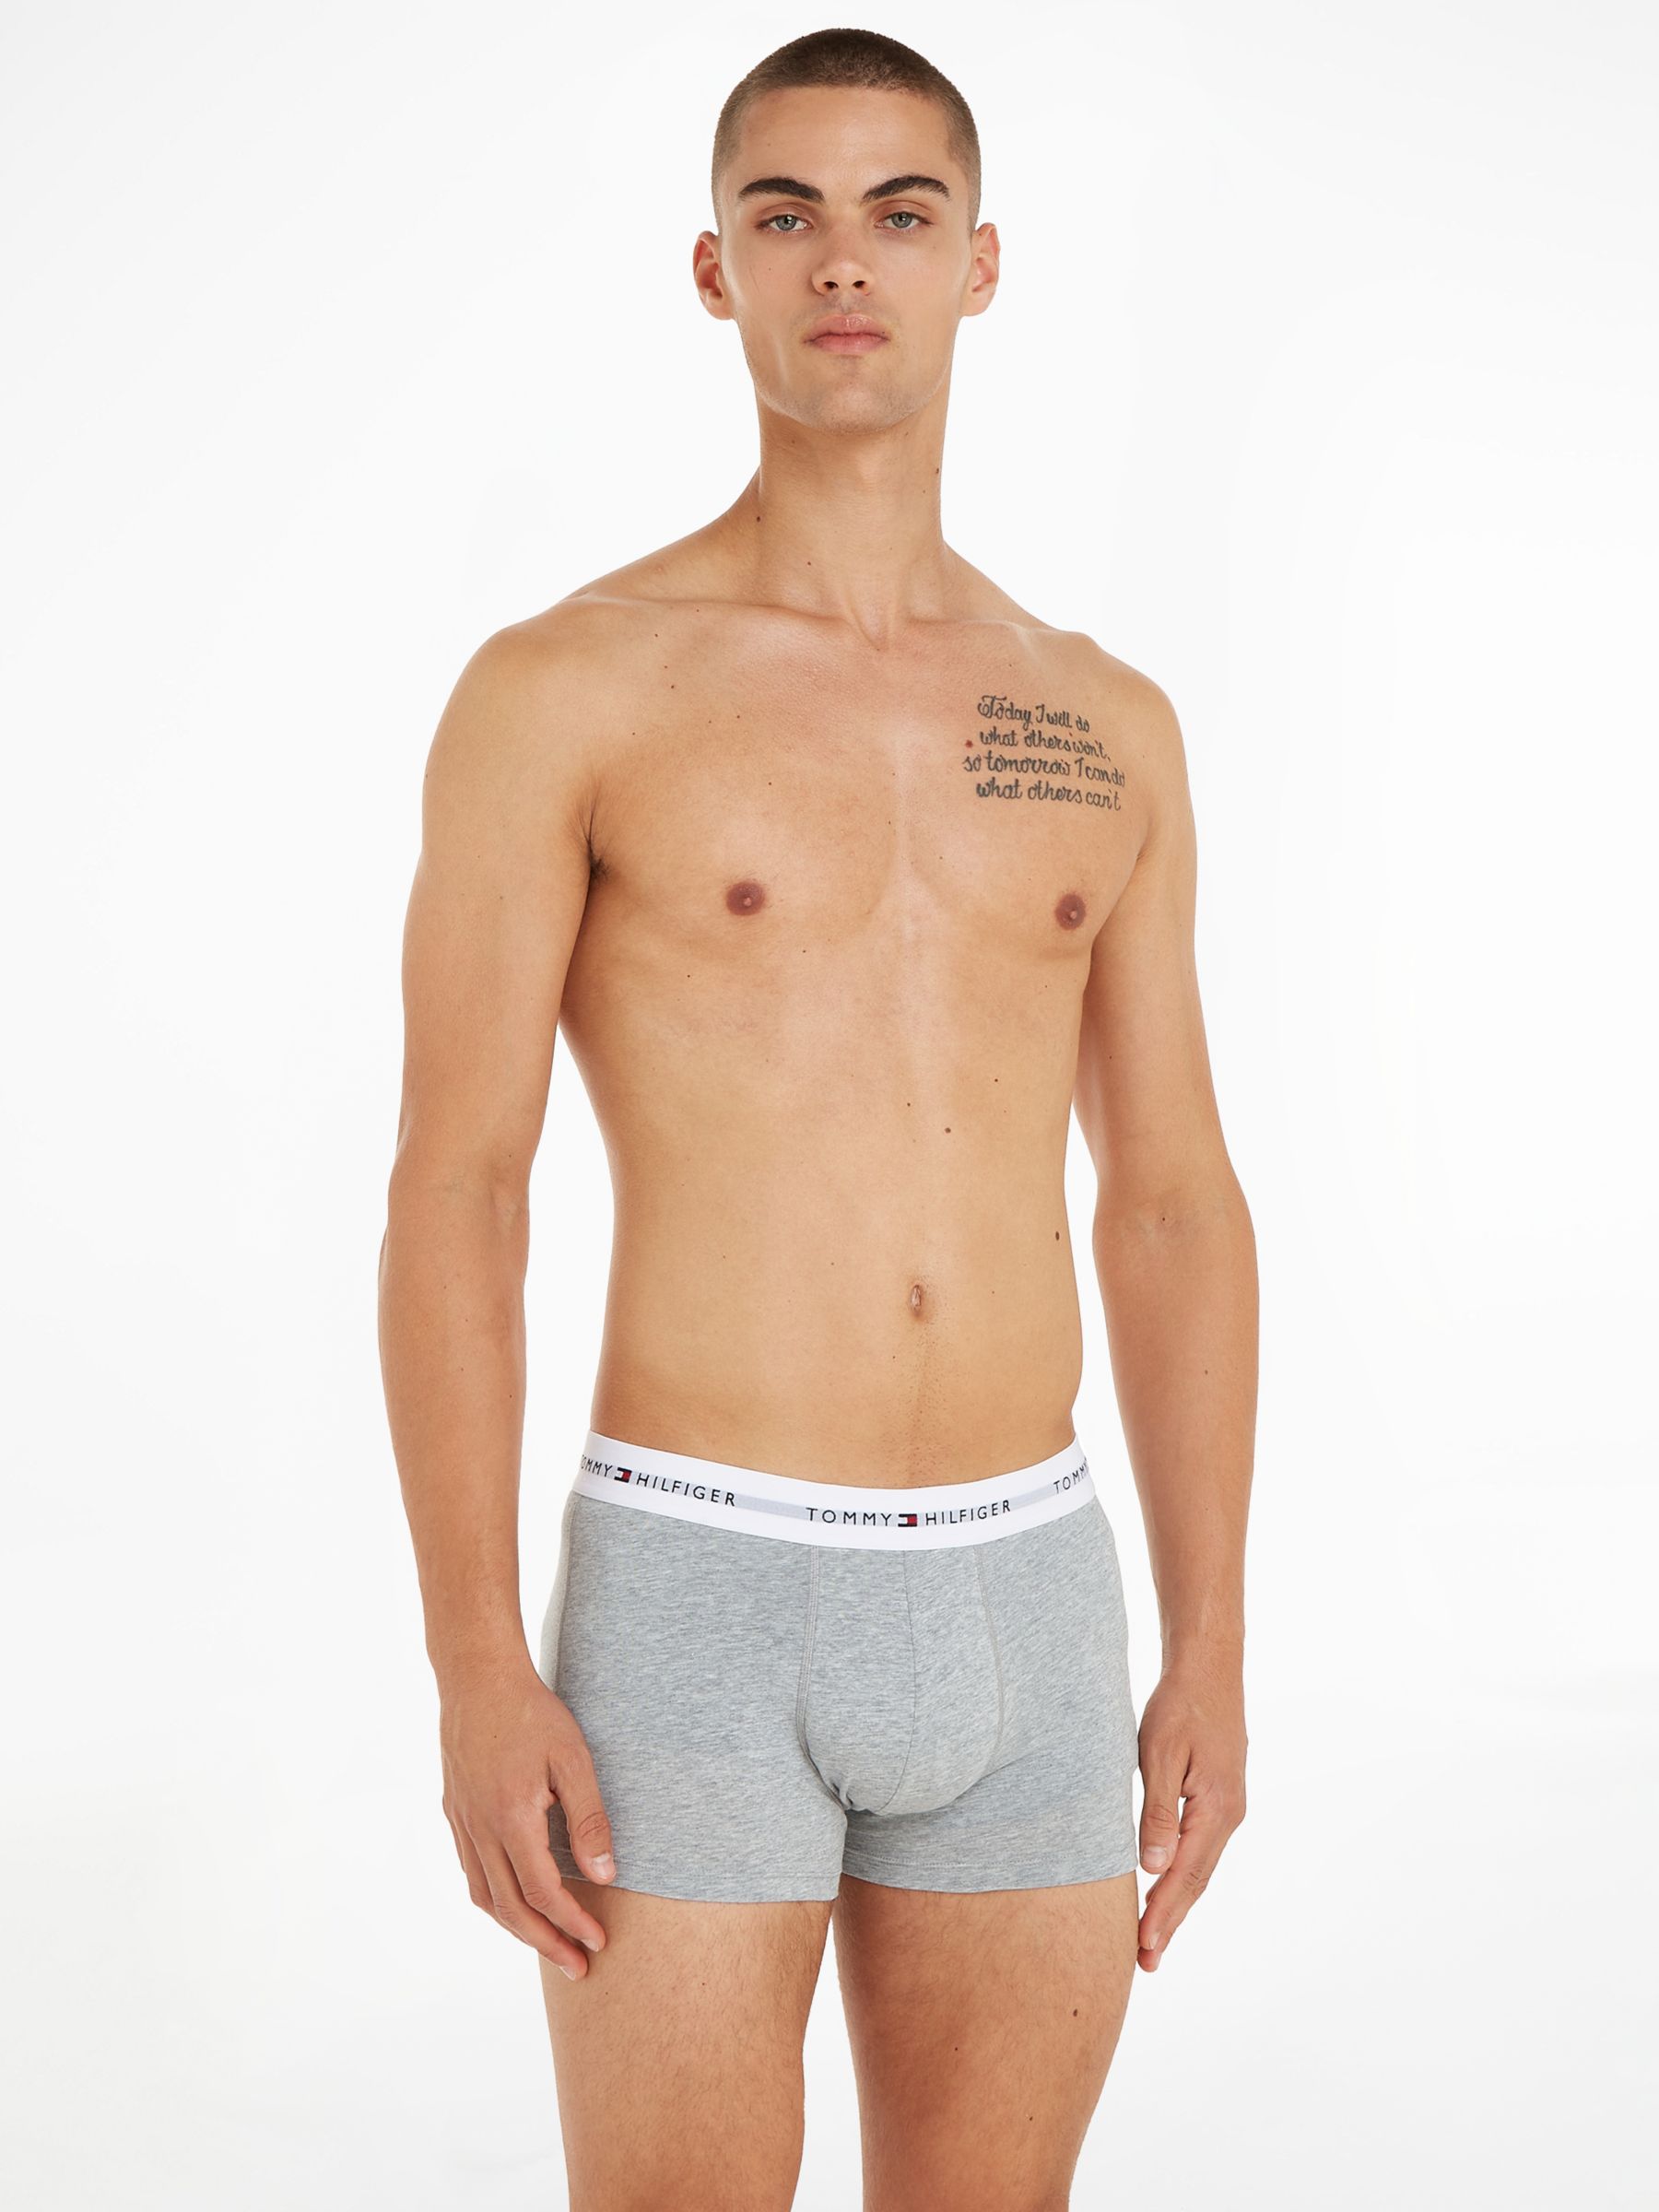 Tommy Hilfiger Essential Logo Waistband Trunks, Pack of 3, Grey/Black/White, L